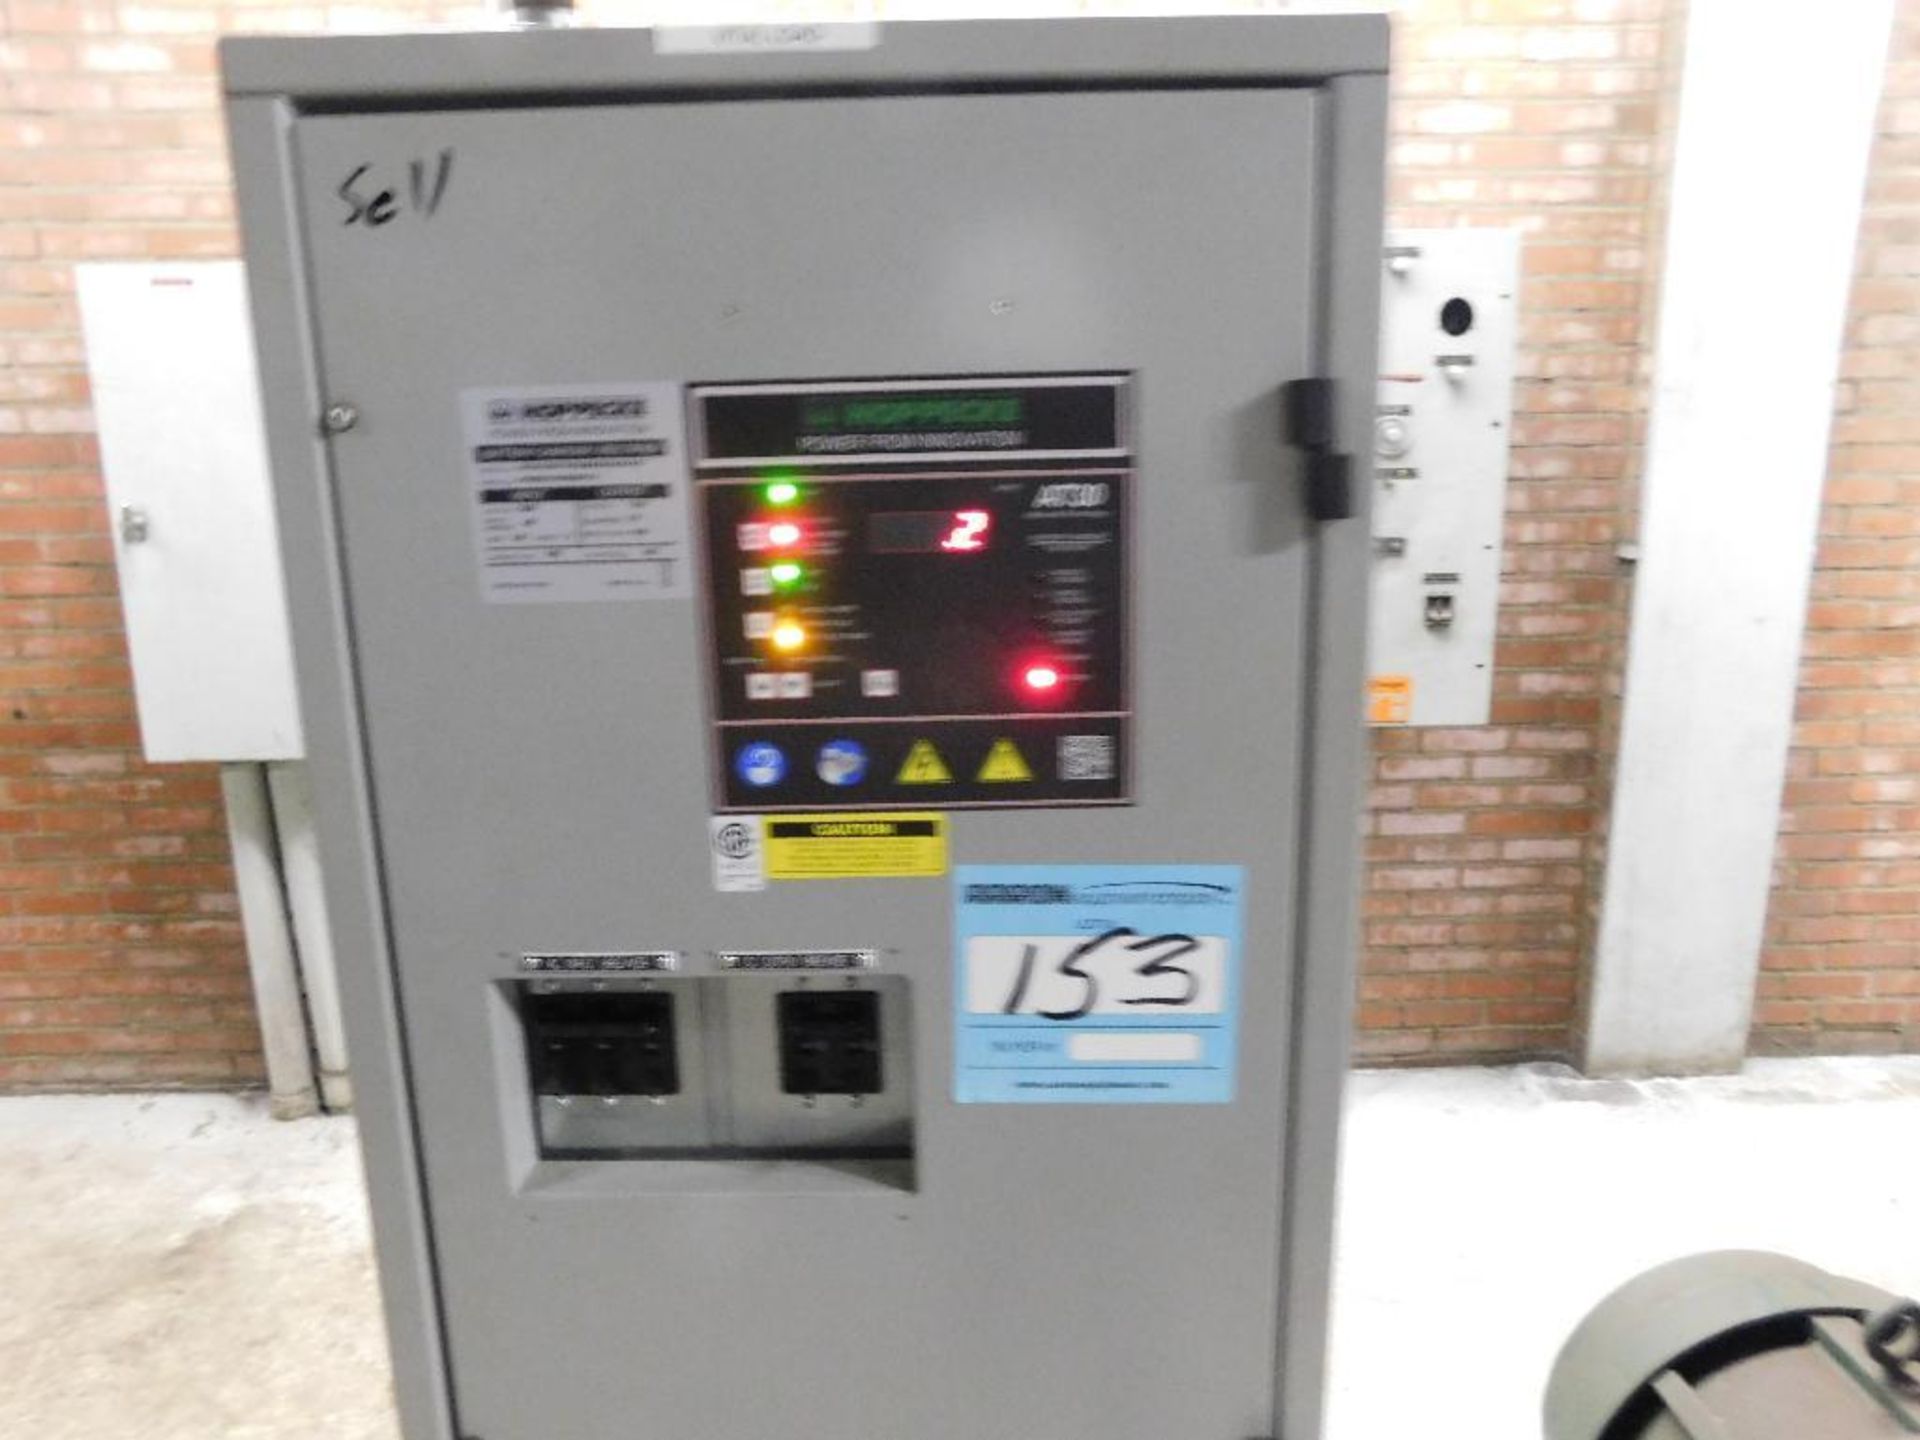 Hoppecke 60 Cell 130 Volt DC Battery Backup System with Model AT-30 Charger Rectifier and 60 7 OSP, - Image 2 of 3